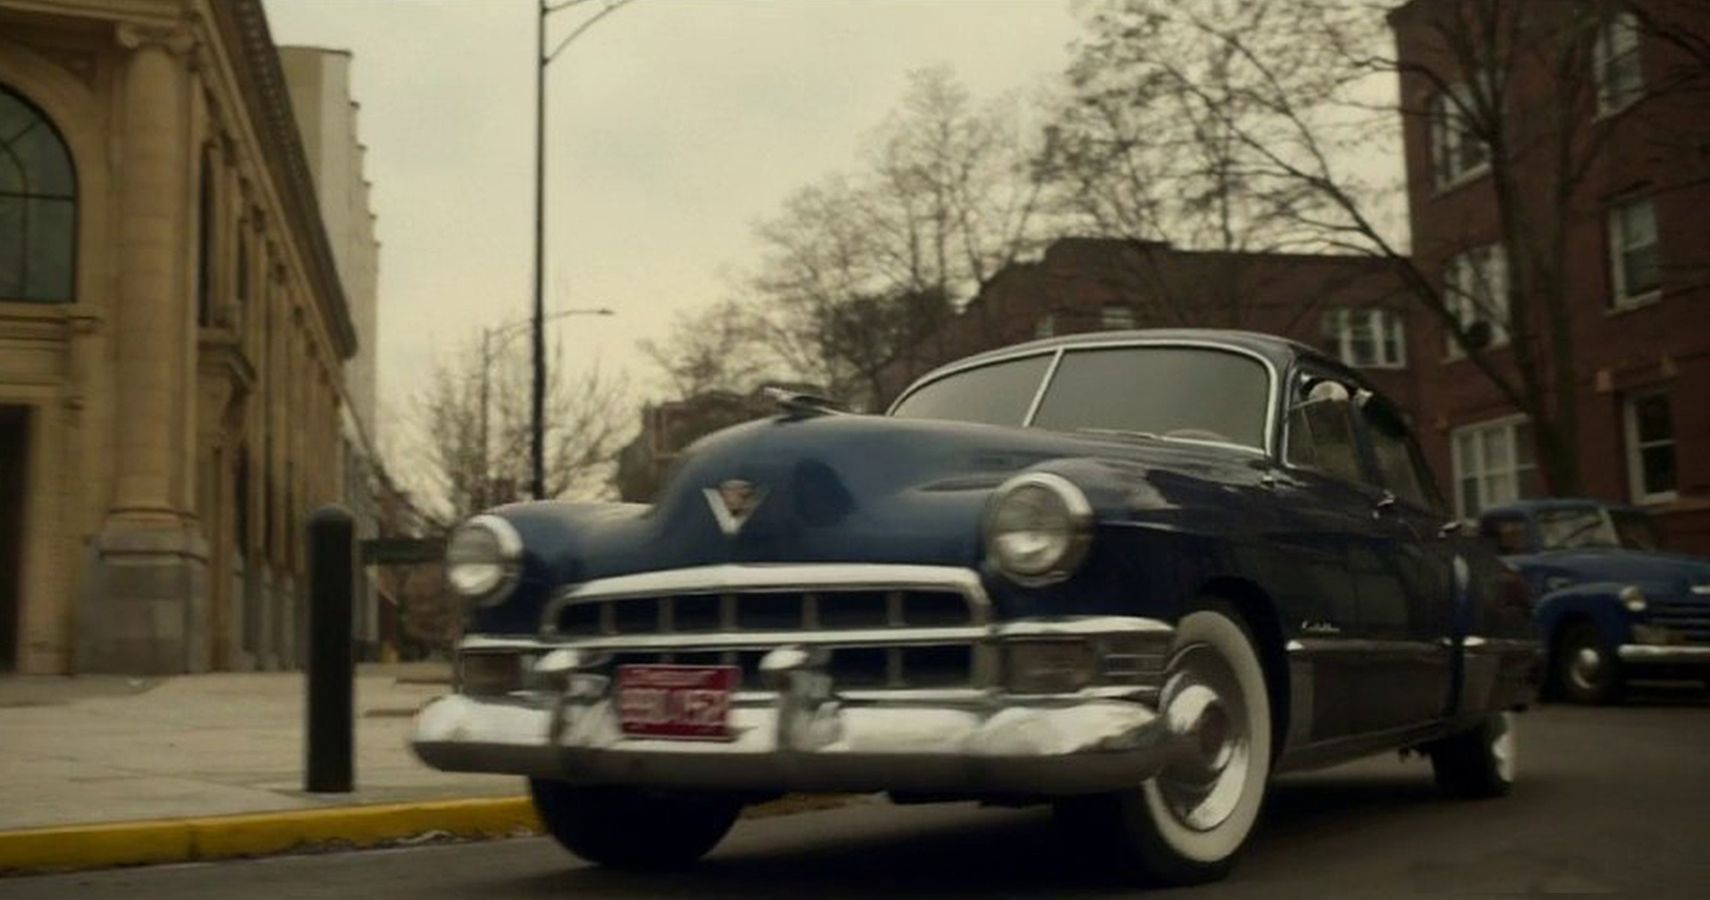 The Cadillac Series 62 Is One Of Many Classic Cars Used In The Last Season Of Fargo